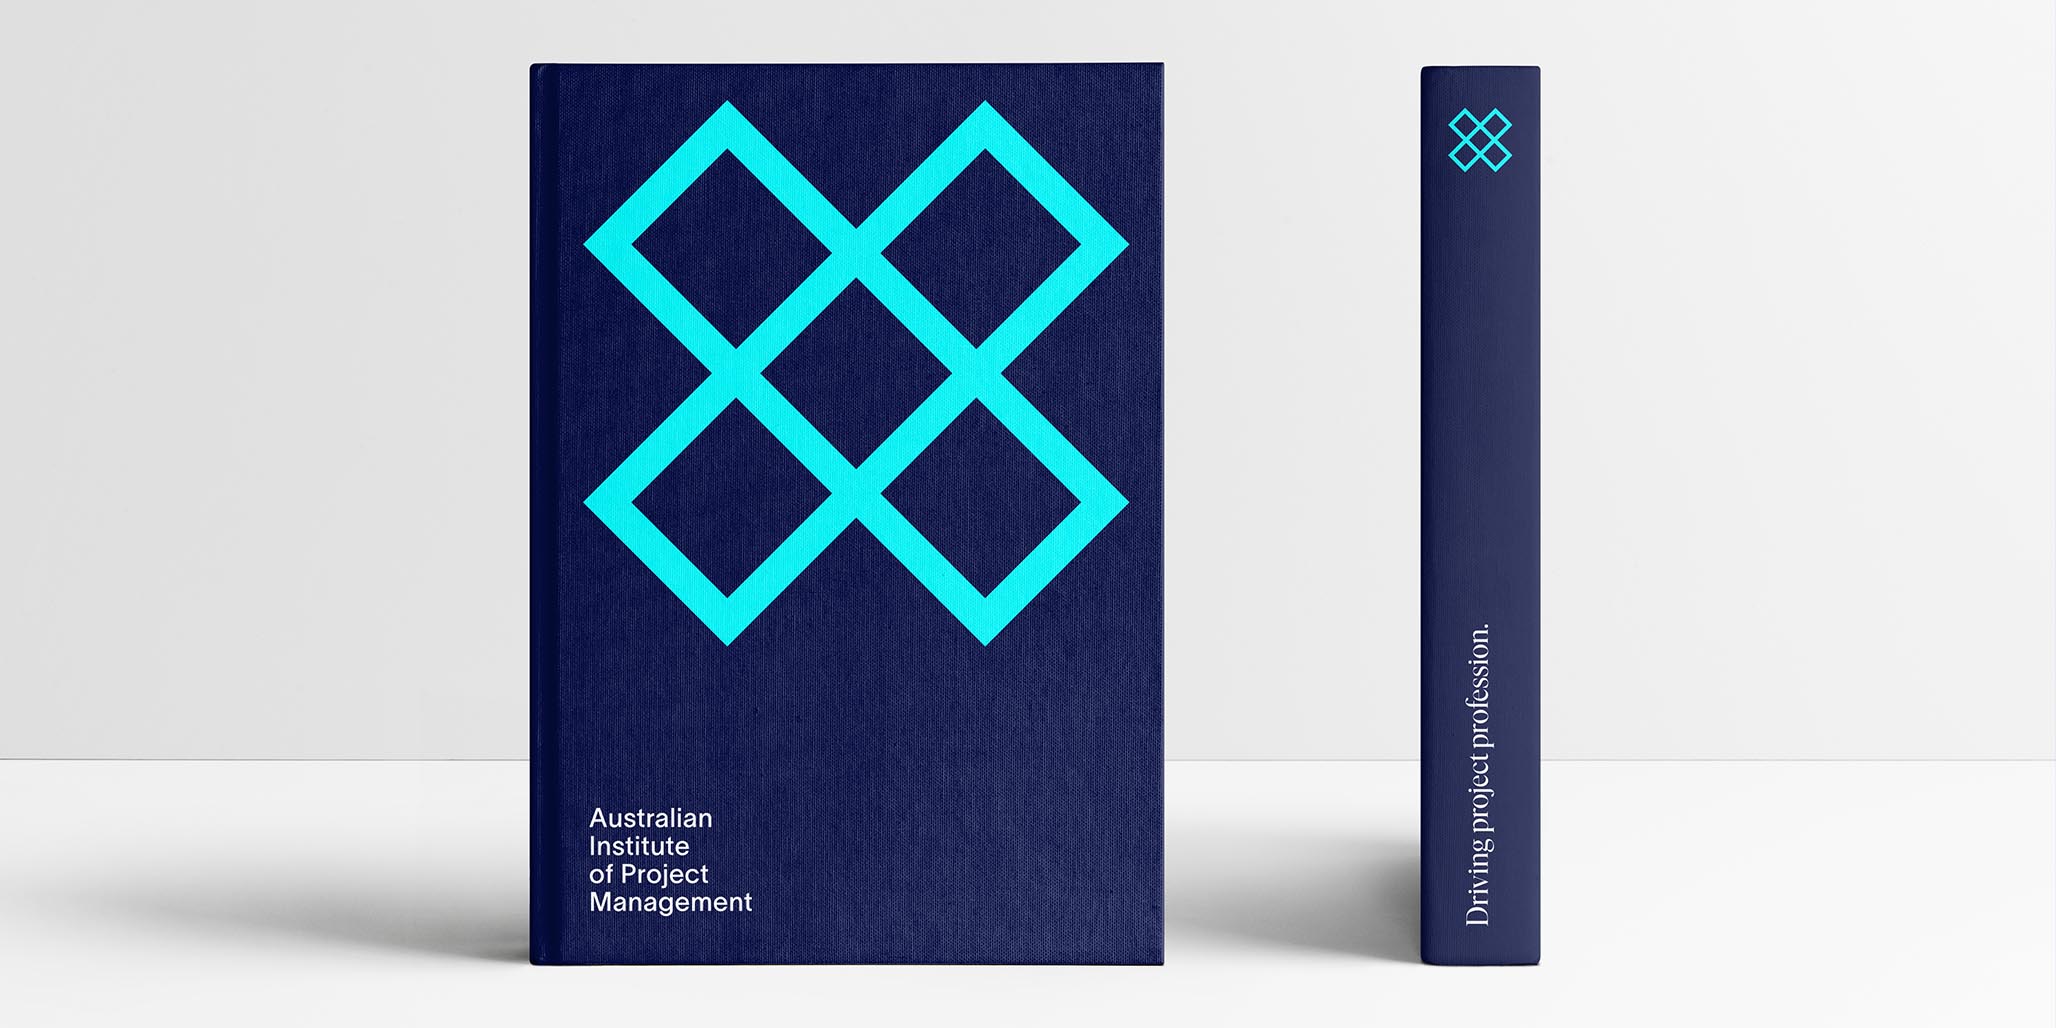 Brand positioning for Australian Institute of Project Management, brand identity image I